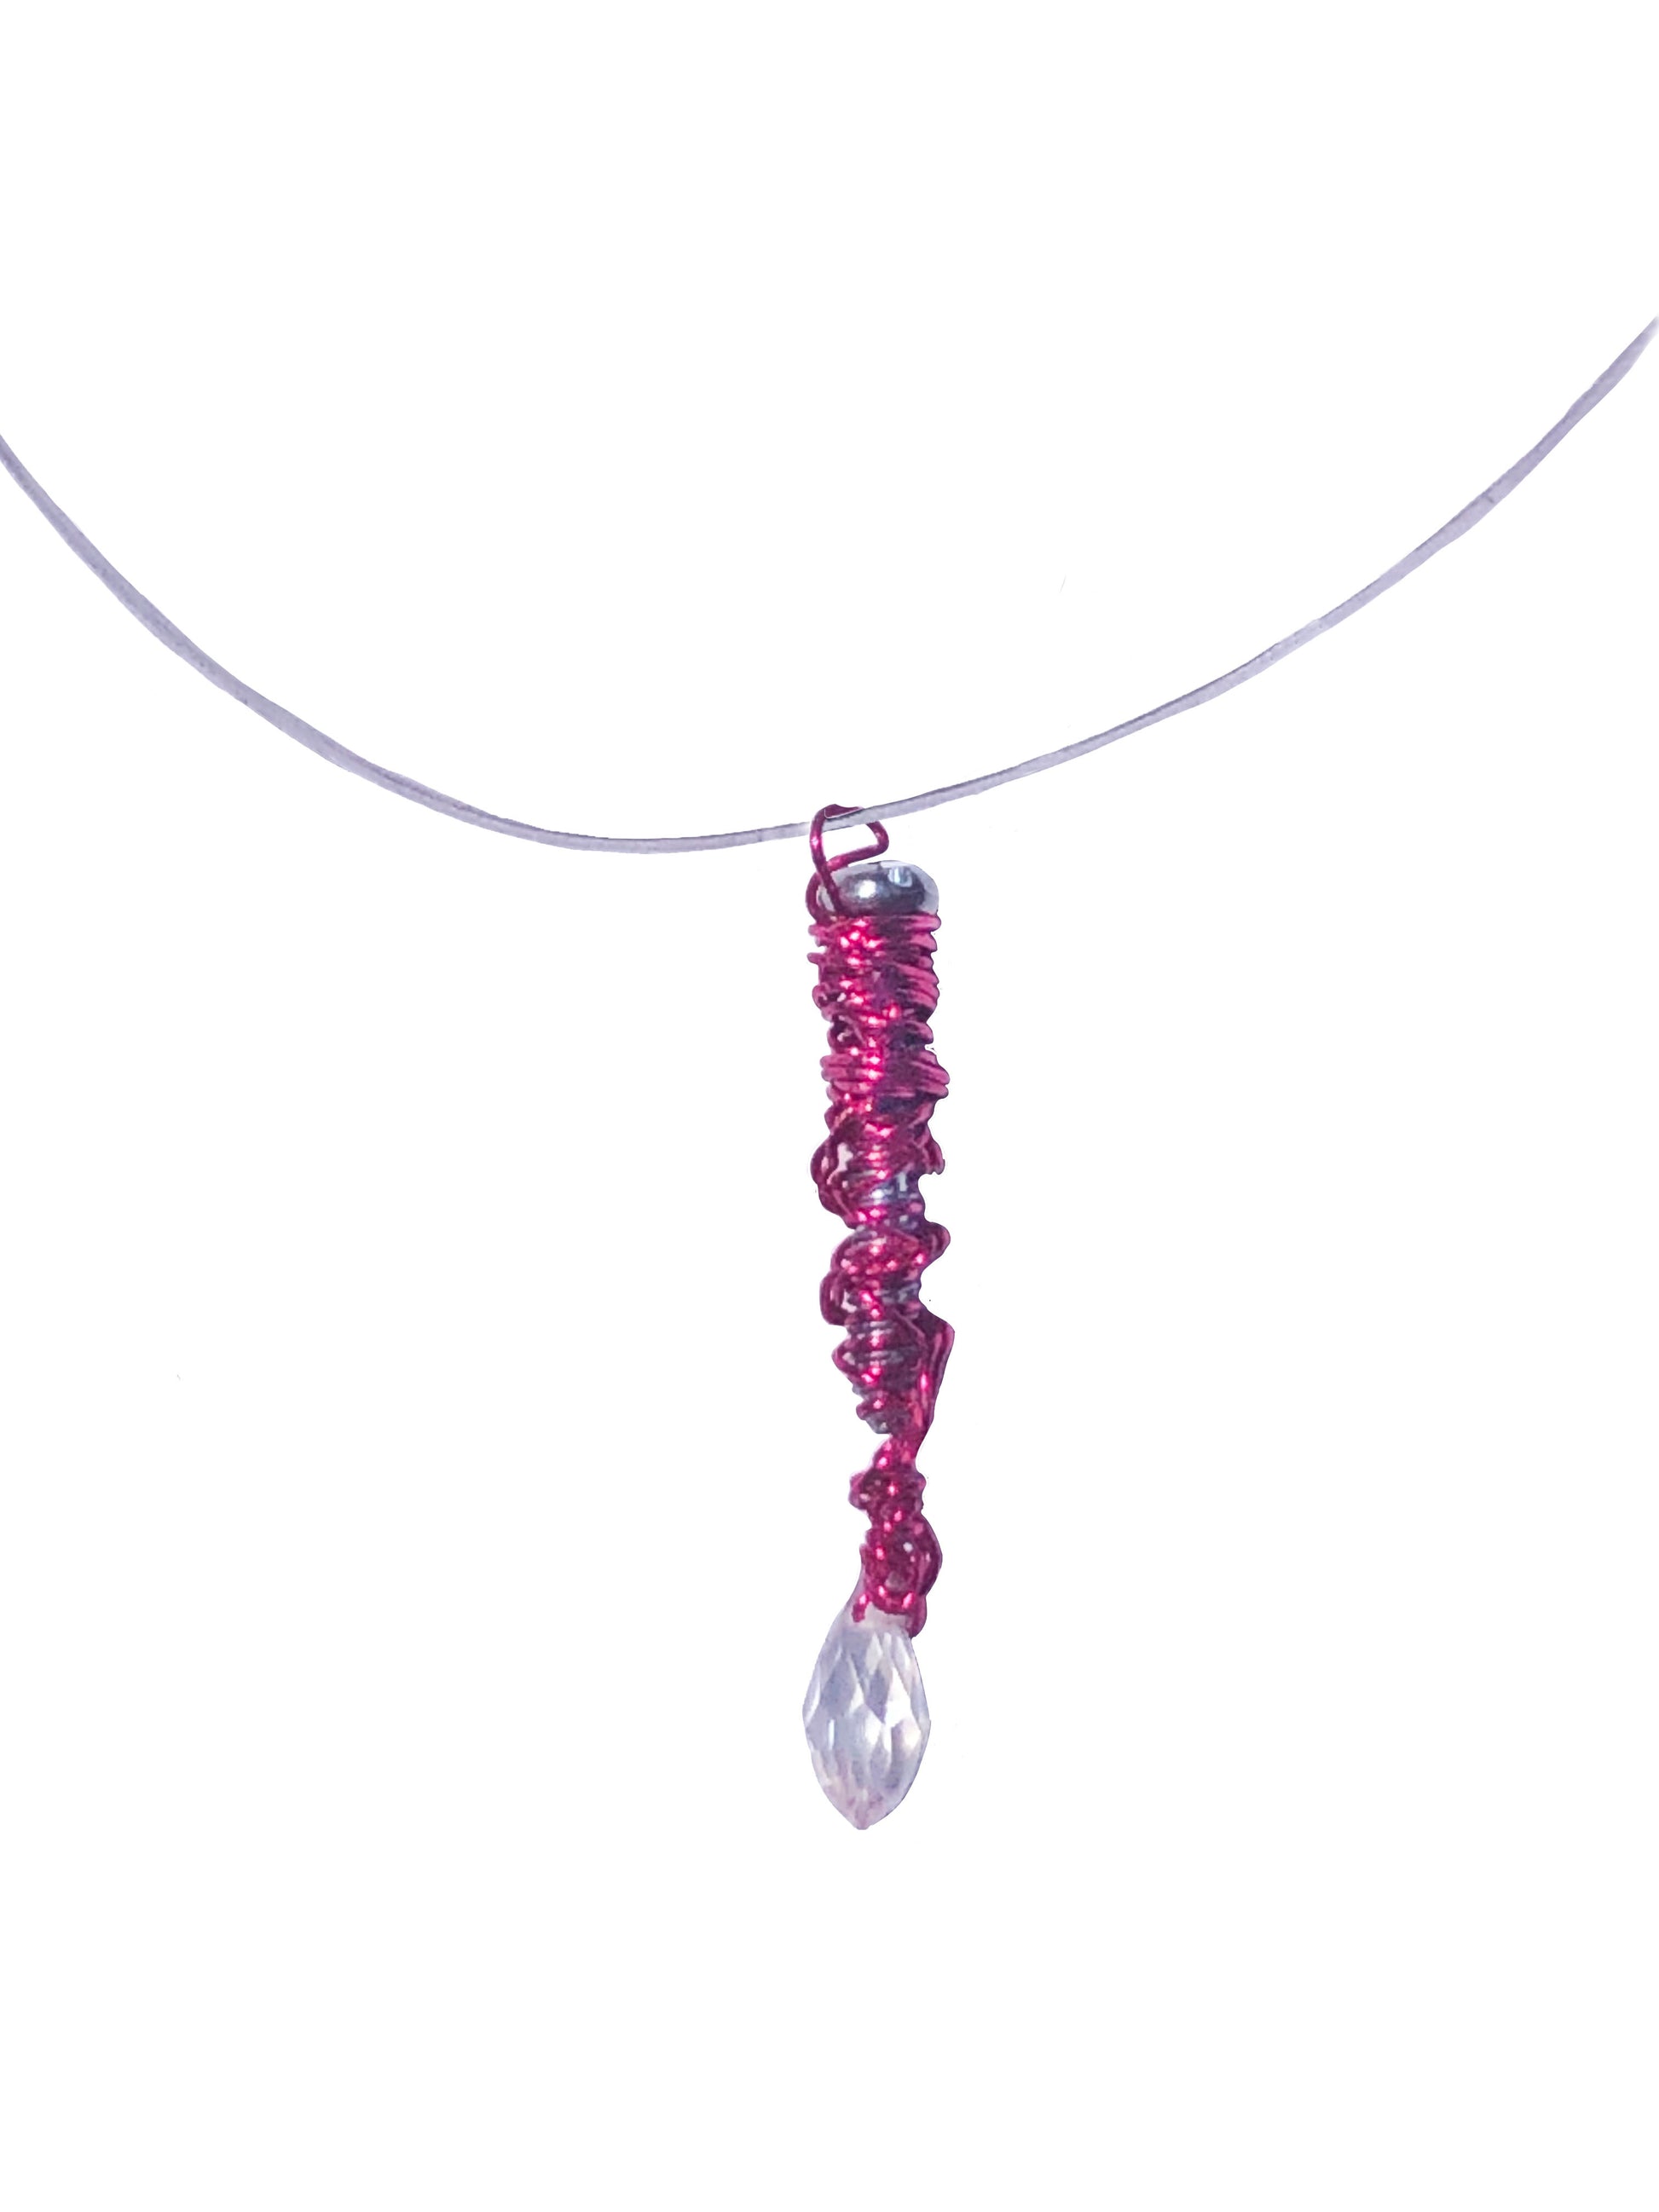 handcrafted pink wire wrapped metal screw pendant with a clear glass charm